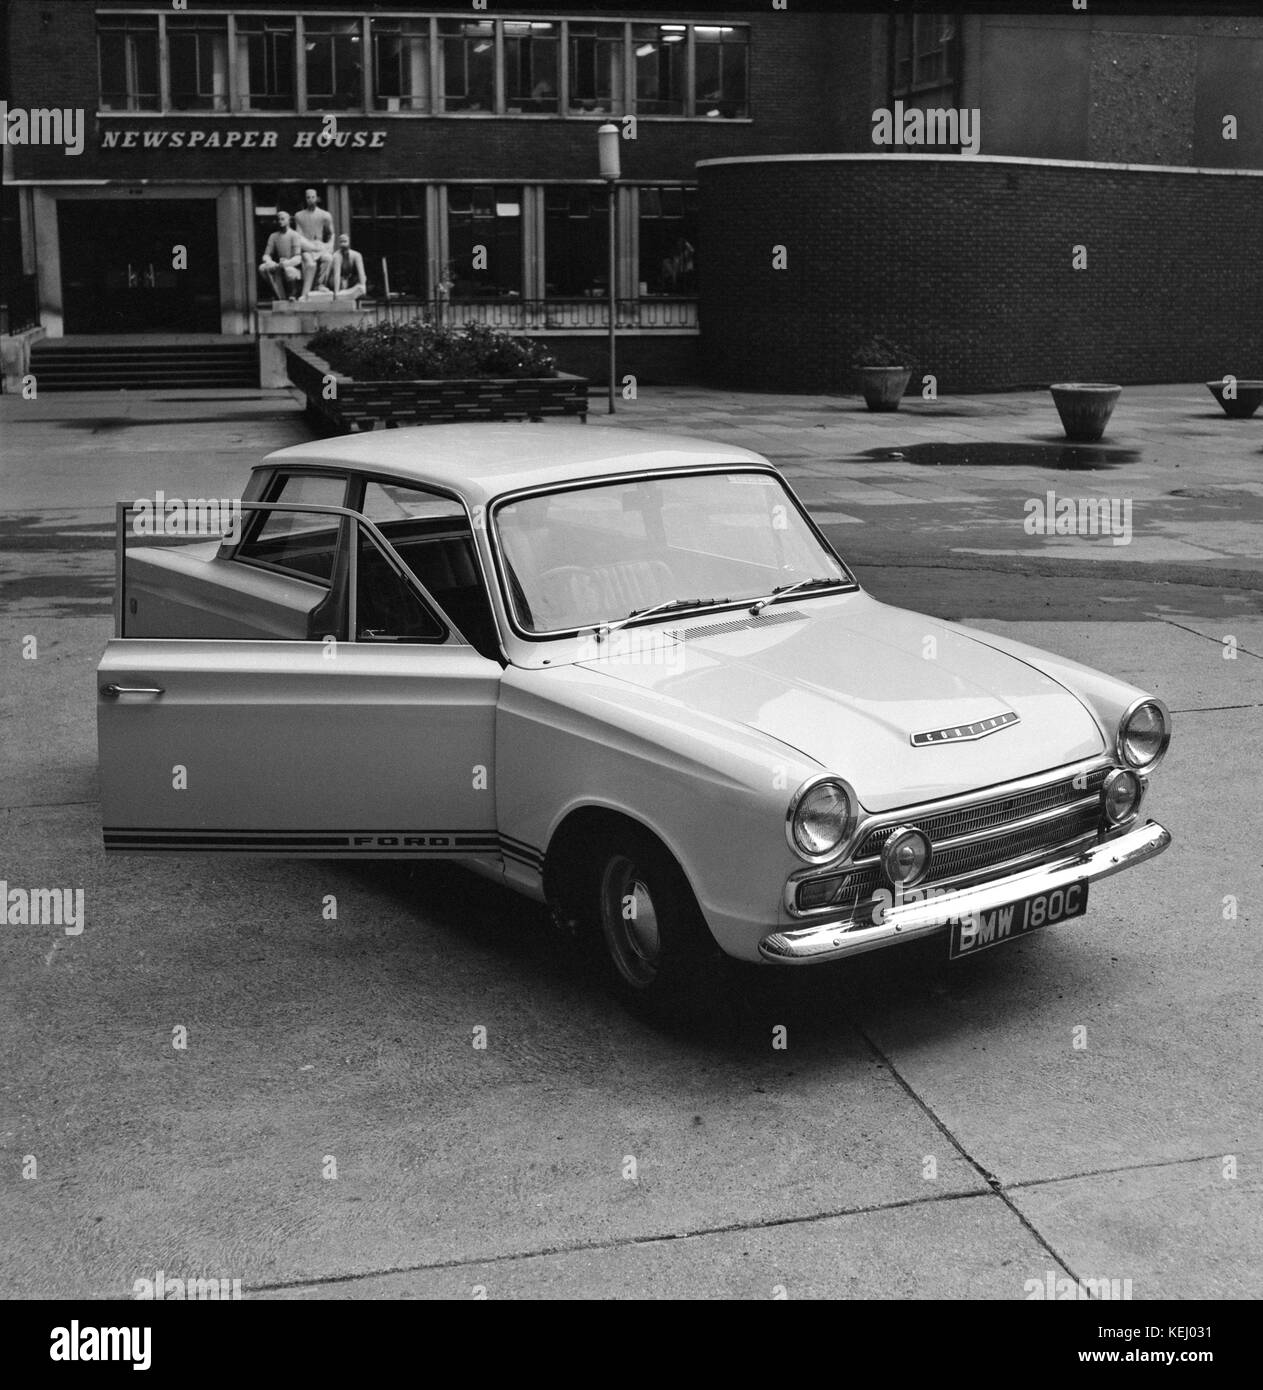 Press photos of a 1966 Ford Cortina Mk 1 GT, shown outside Newspaper House in London. Photos taken on 21st October 1966. Stock Photo